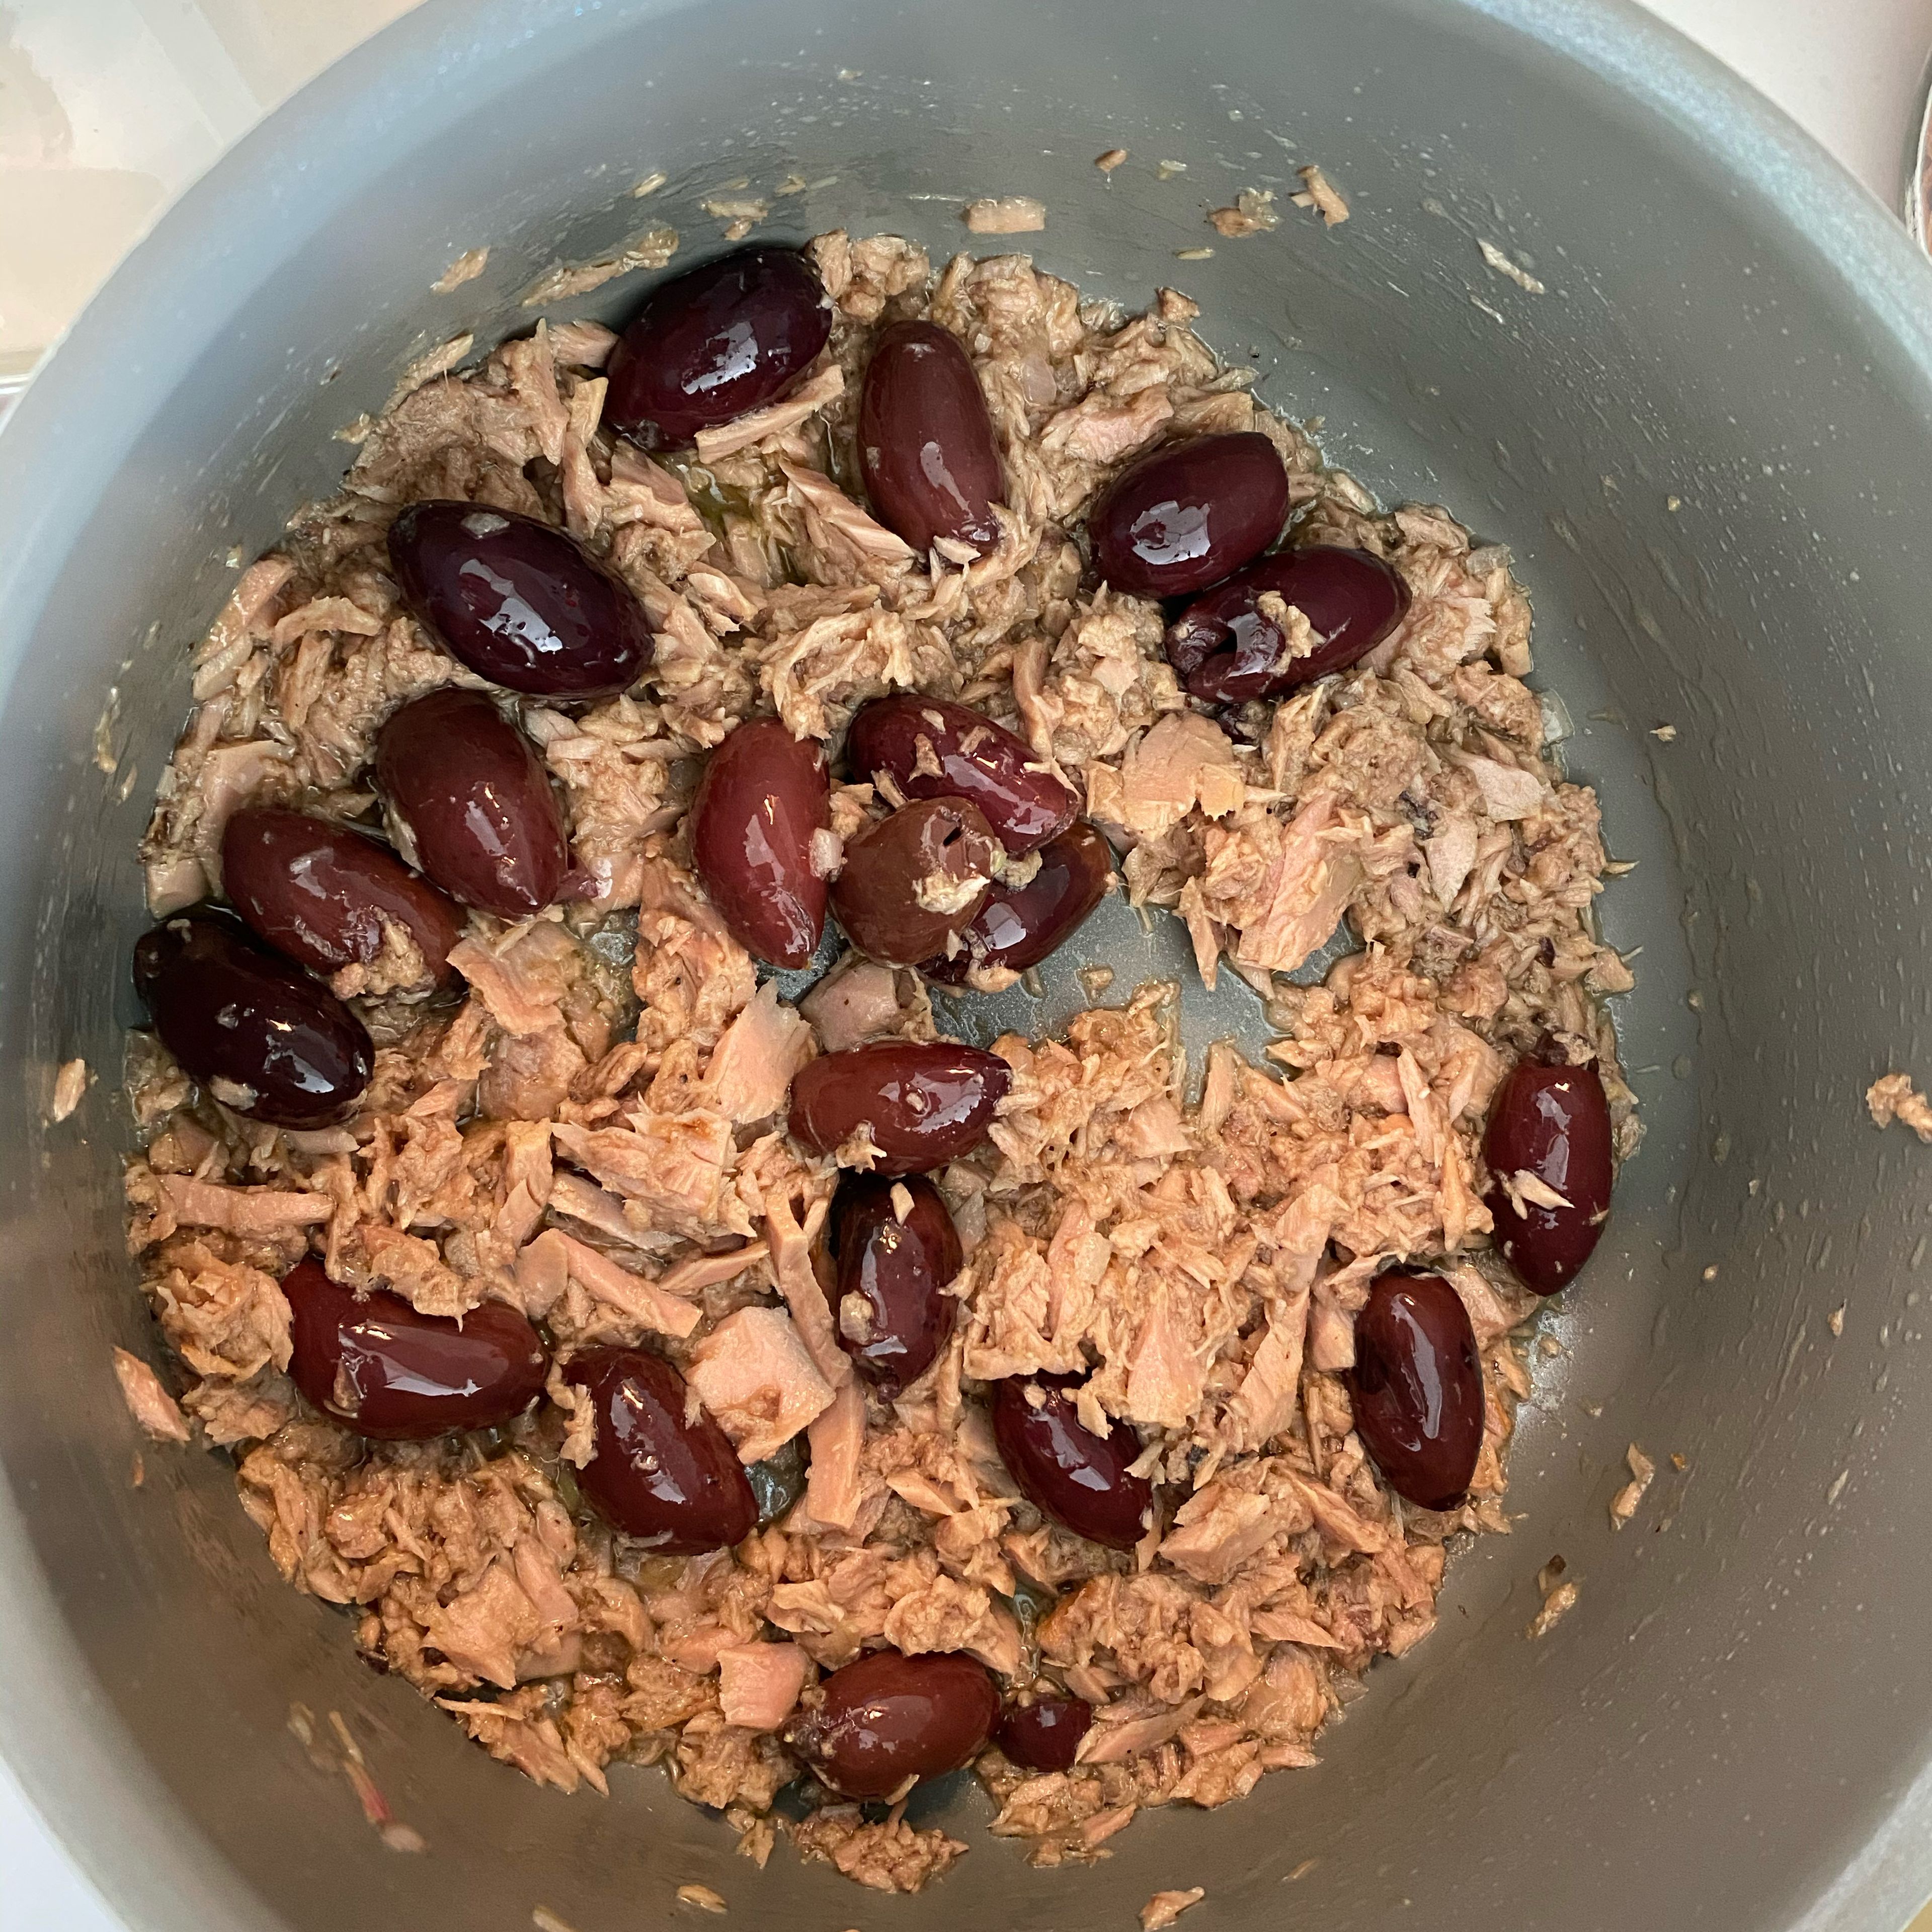 Start with the sauce. In a pan put the finely chopped shallot, extra virgin olive oil, the olives and the drained tuna, season with salt and pepper, and let it sizzle for 2-3 minutes then remove from the heat. Your sauce is done.